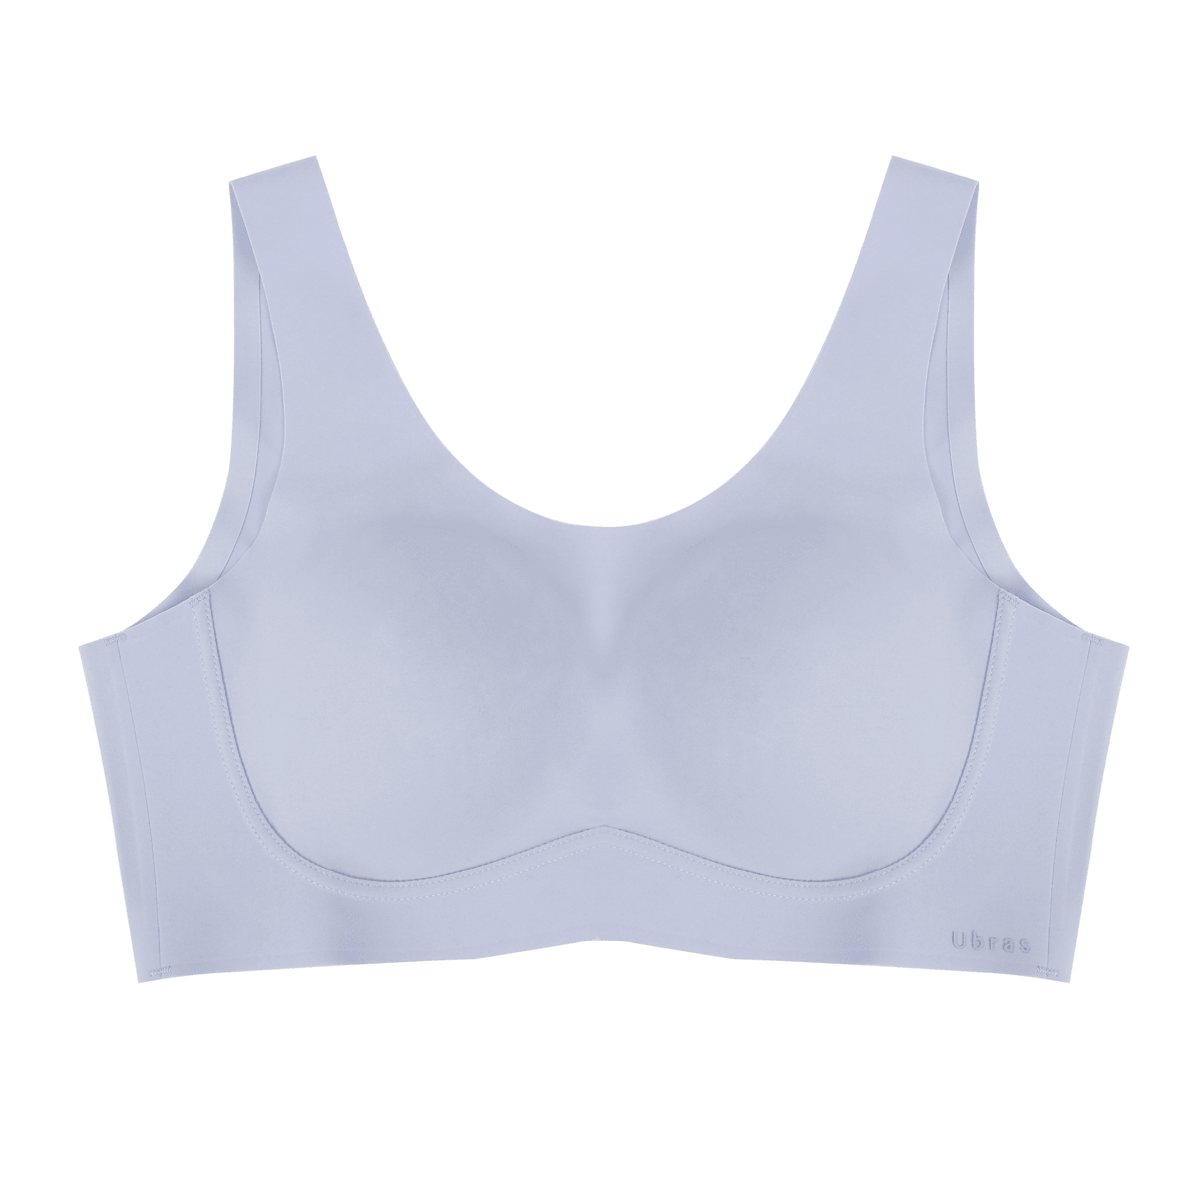 Get ubras Women's Wireless For Work&Life Wavy-Edge Hook Bra Peach One size  1 each Delivered